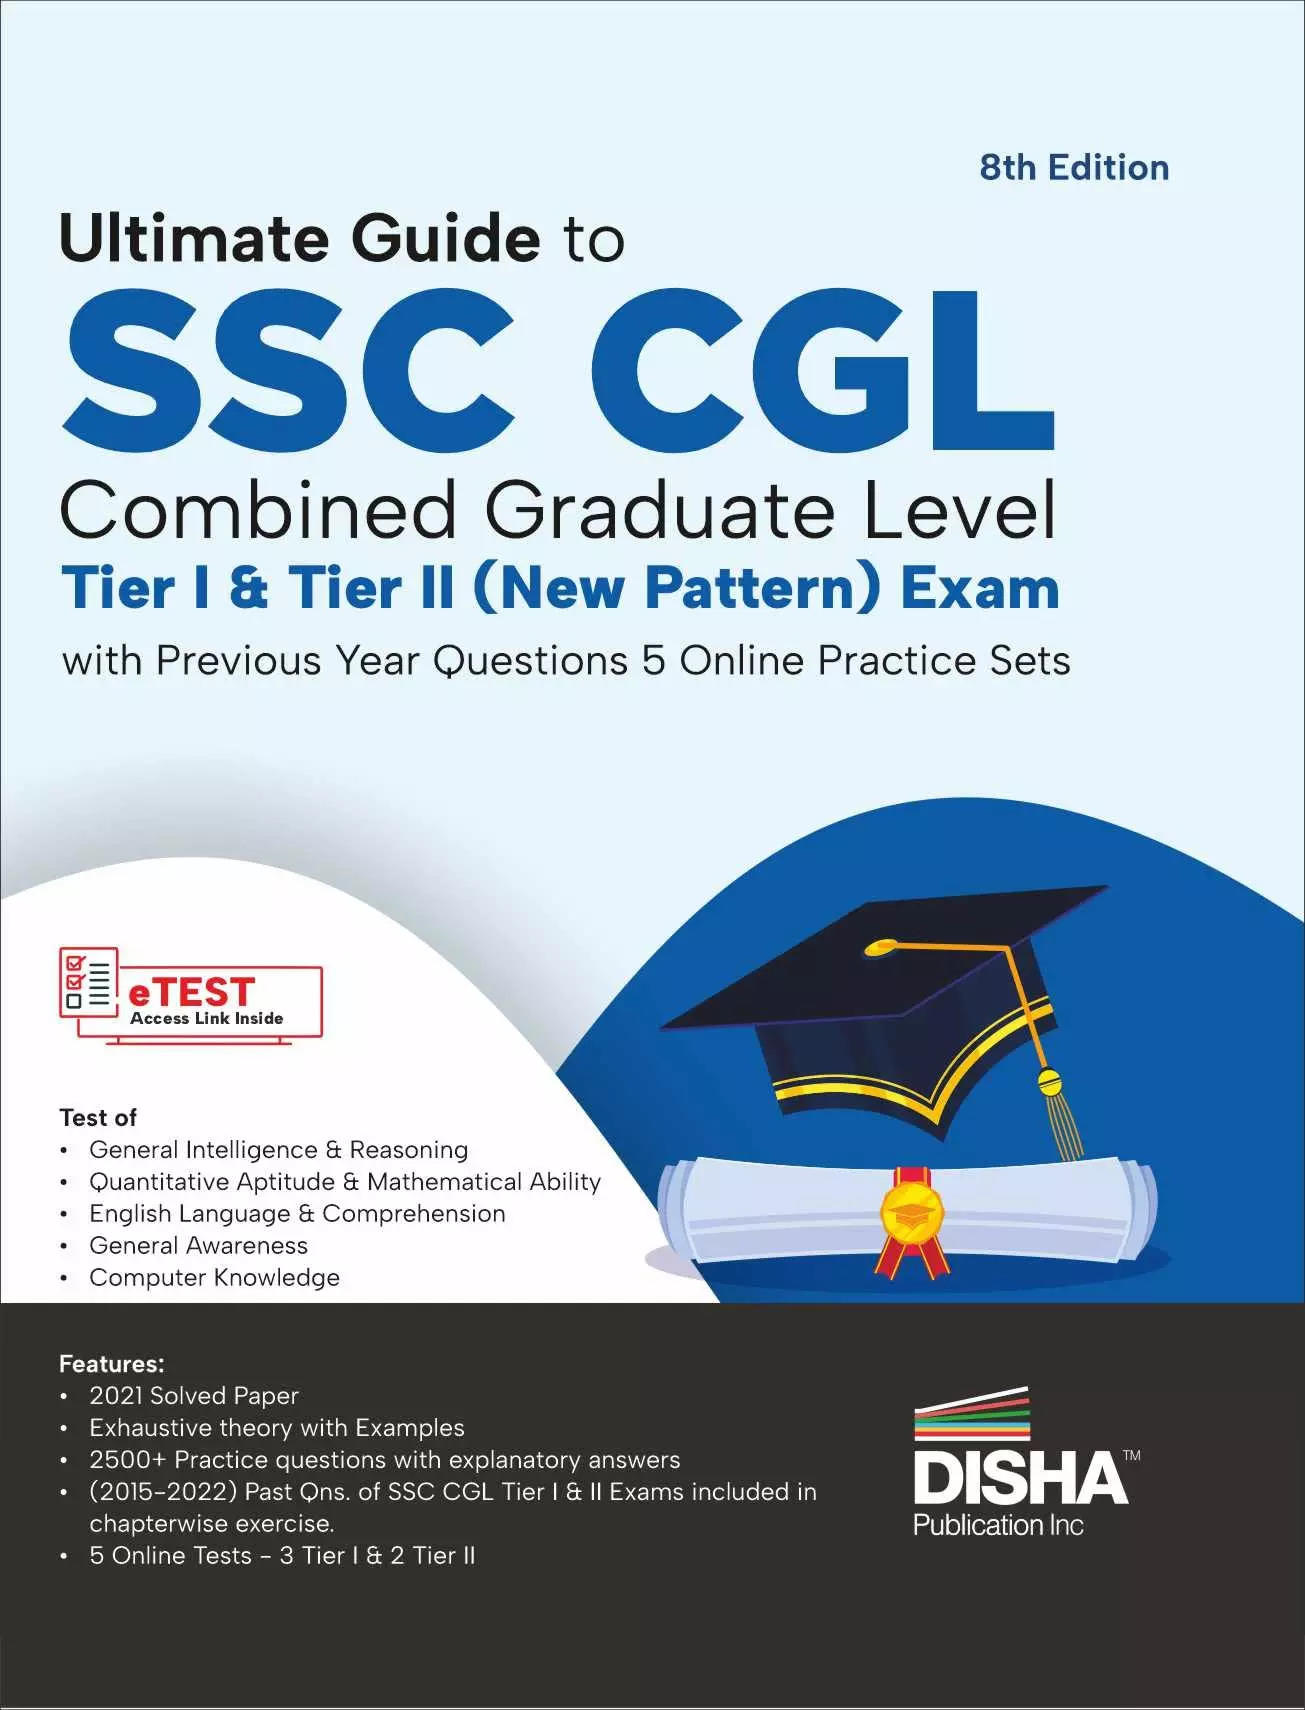 Best SSC CGL book 7 Best SSC CGL Books by Experts for Exam